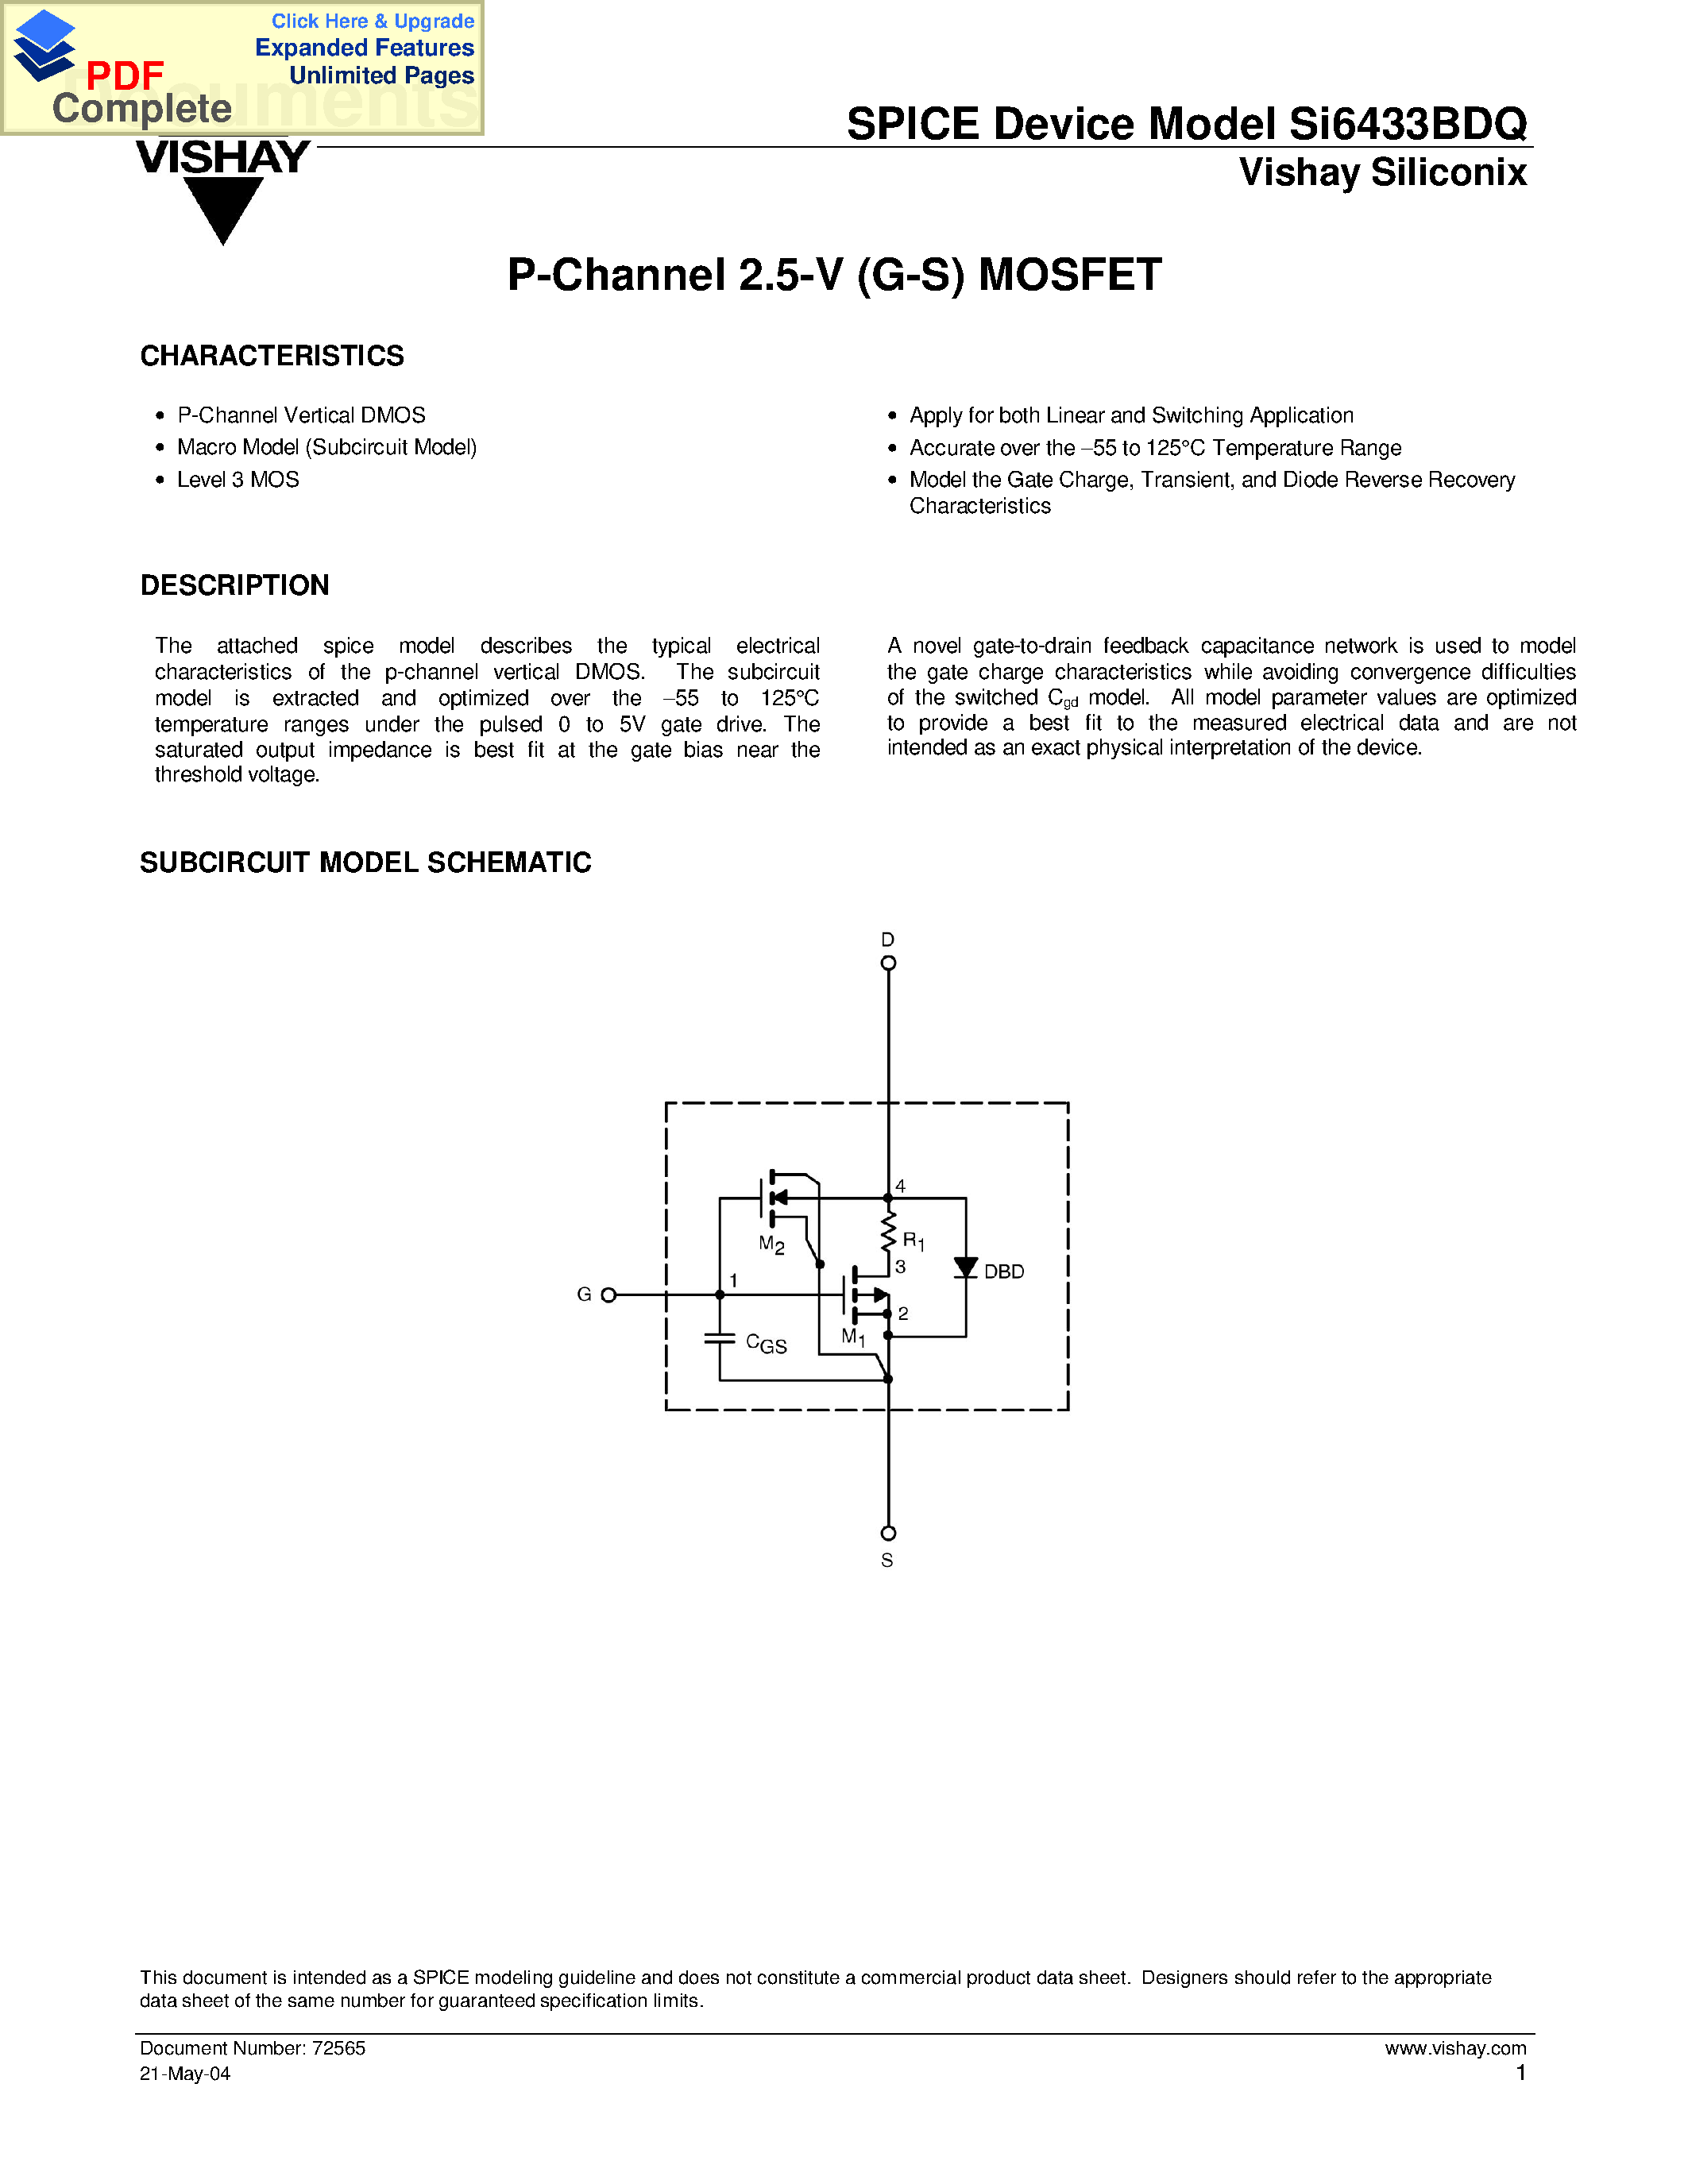 Datasheet SI6433BDQ - P-Channel 2.5-V (G-S) MOSFET page 1